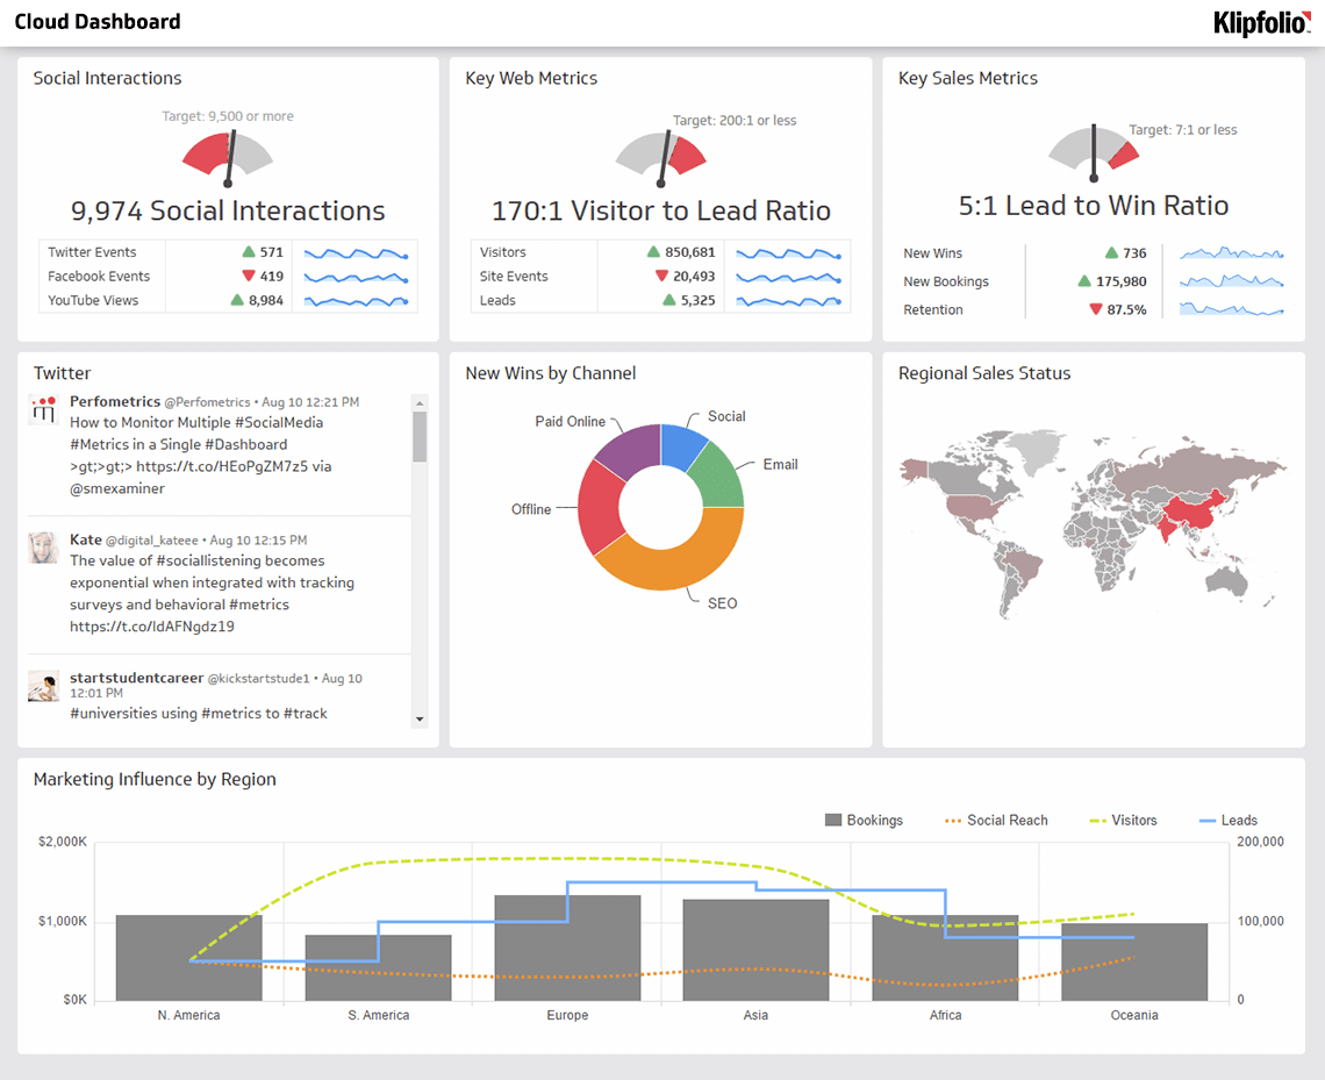 Related Dashboard Examples - Cloud Dashboard